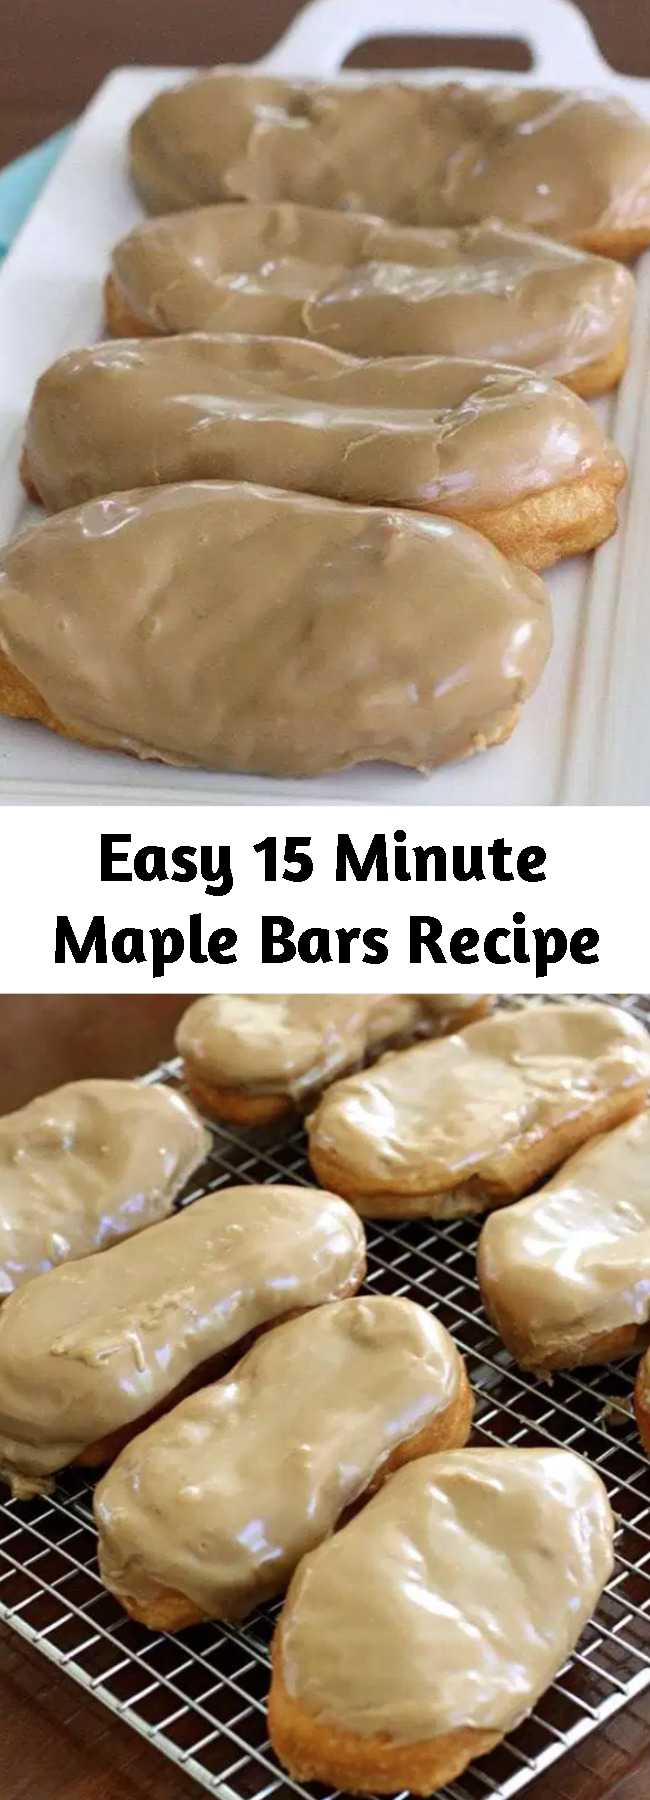 Easy 15 Minute Maple Bars Recipe - Maple Bars made in minutes with biscuit dough & a delicious homemade maple glaze. Never buy store bought again after tasting these warm, fresh maple bars! #donuts #maple #breakfast #doughnuts #maplebar #recipe